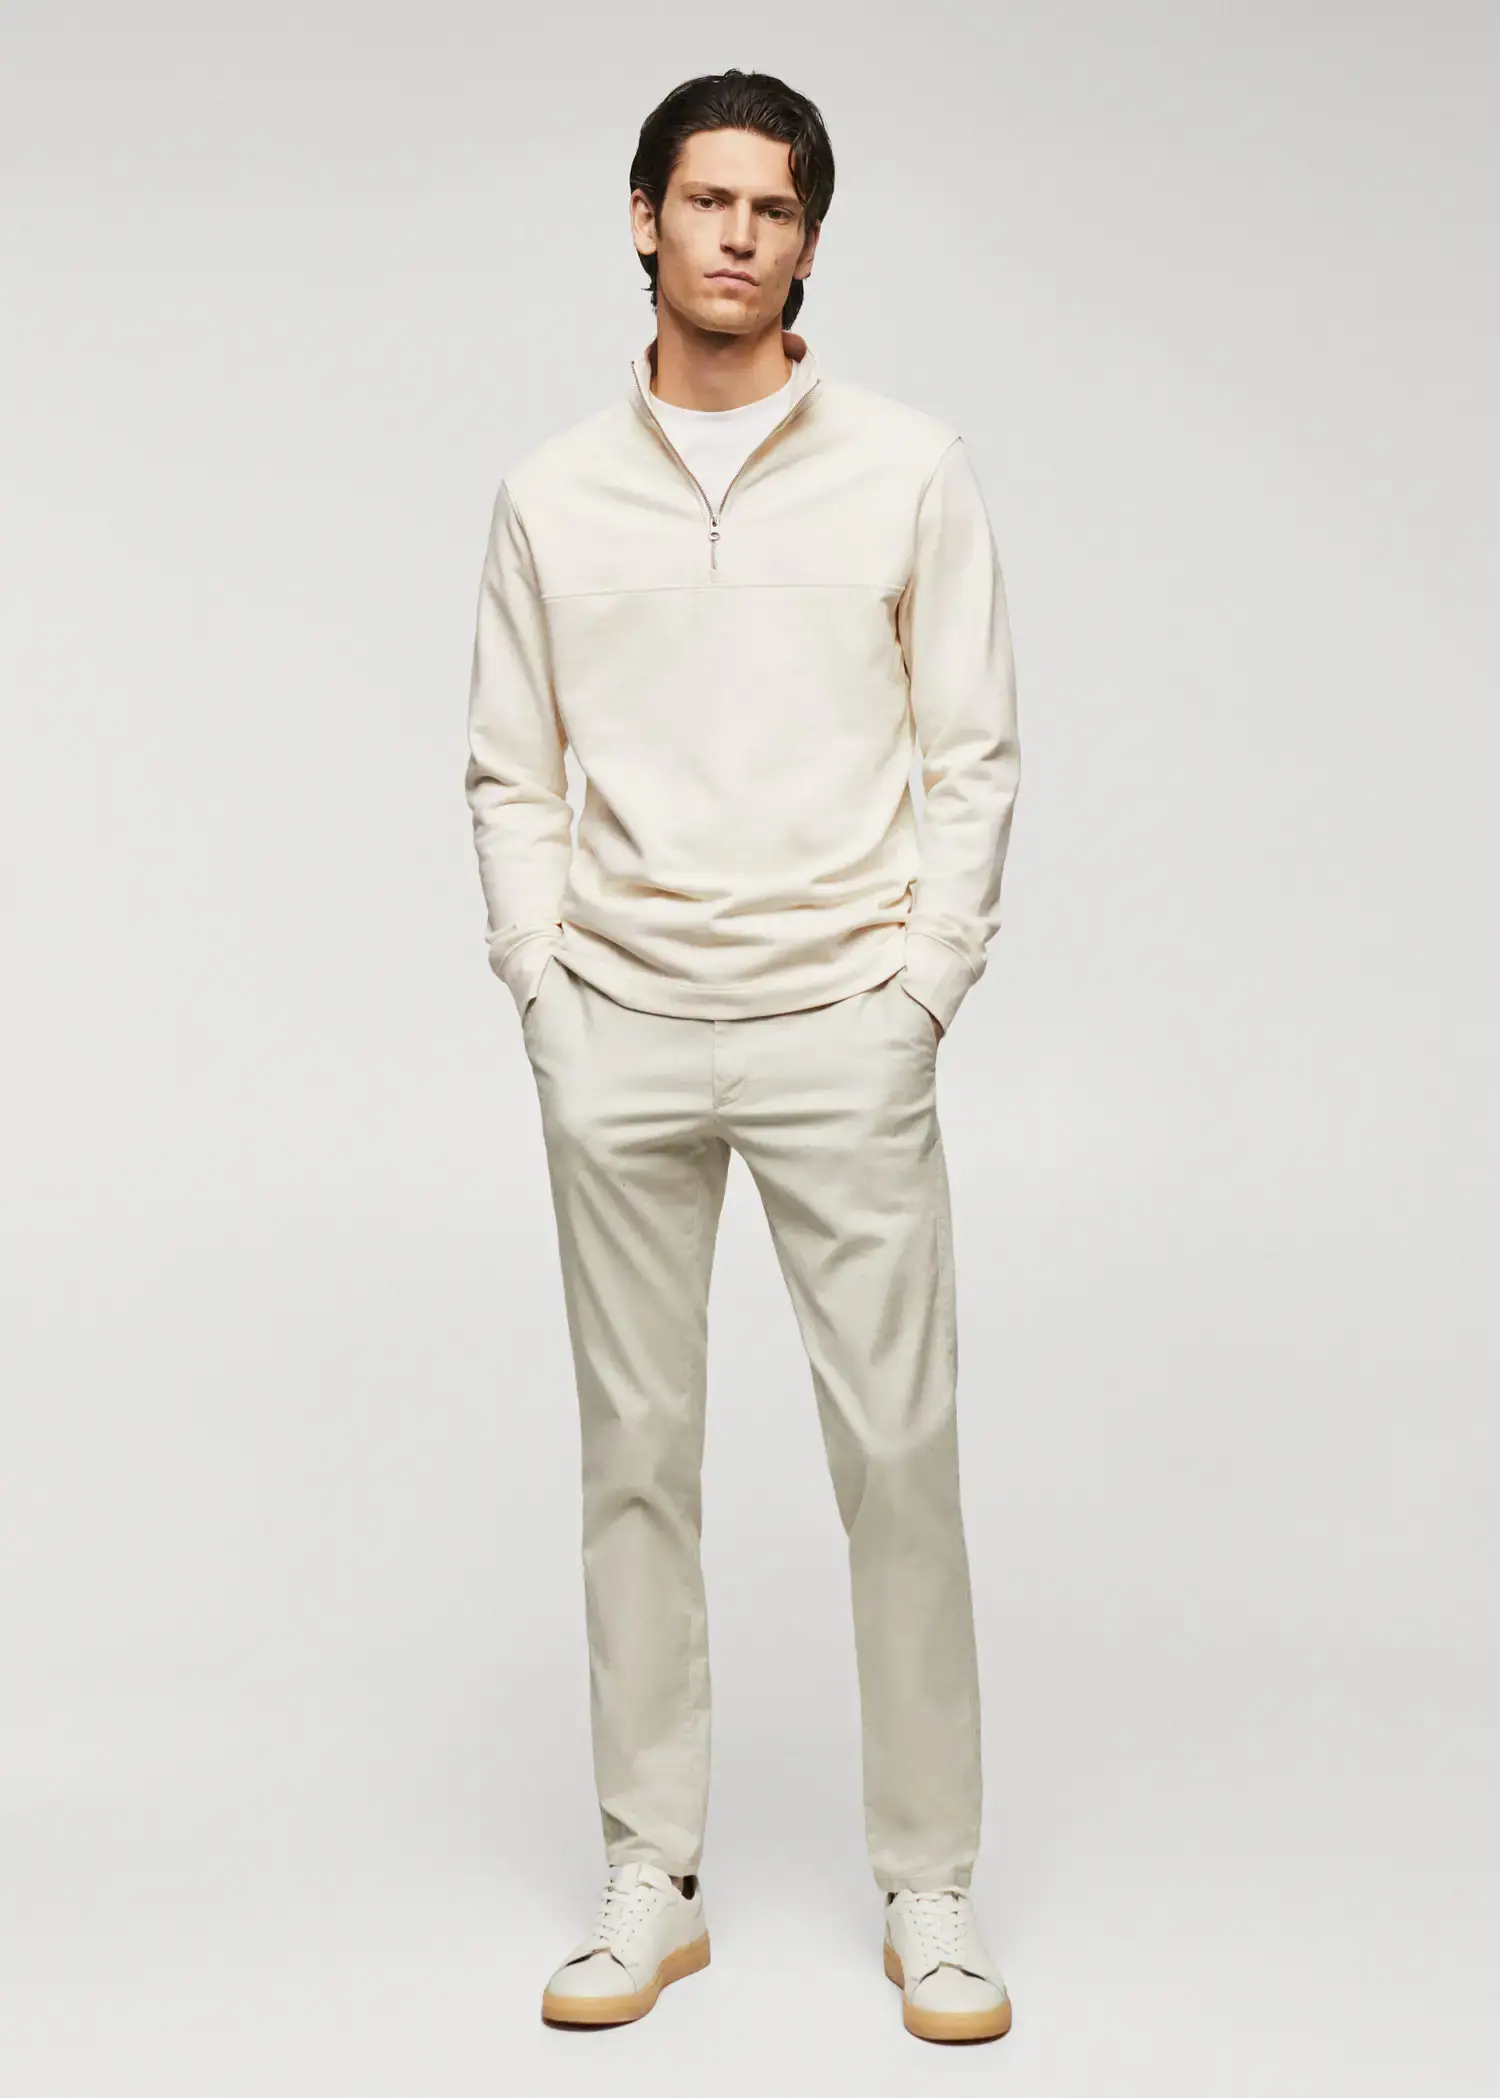 Mango Cotton sweatshirt with zipper neck. a man standing in front of a white wall. 